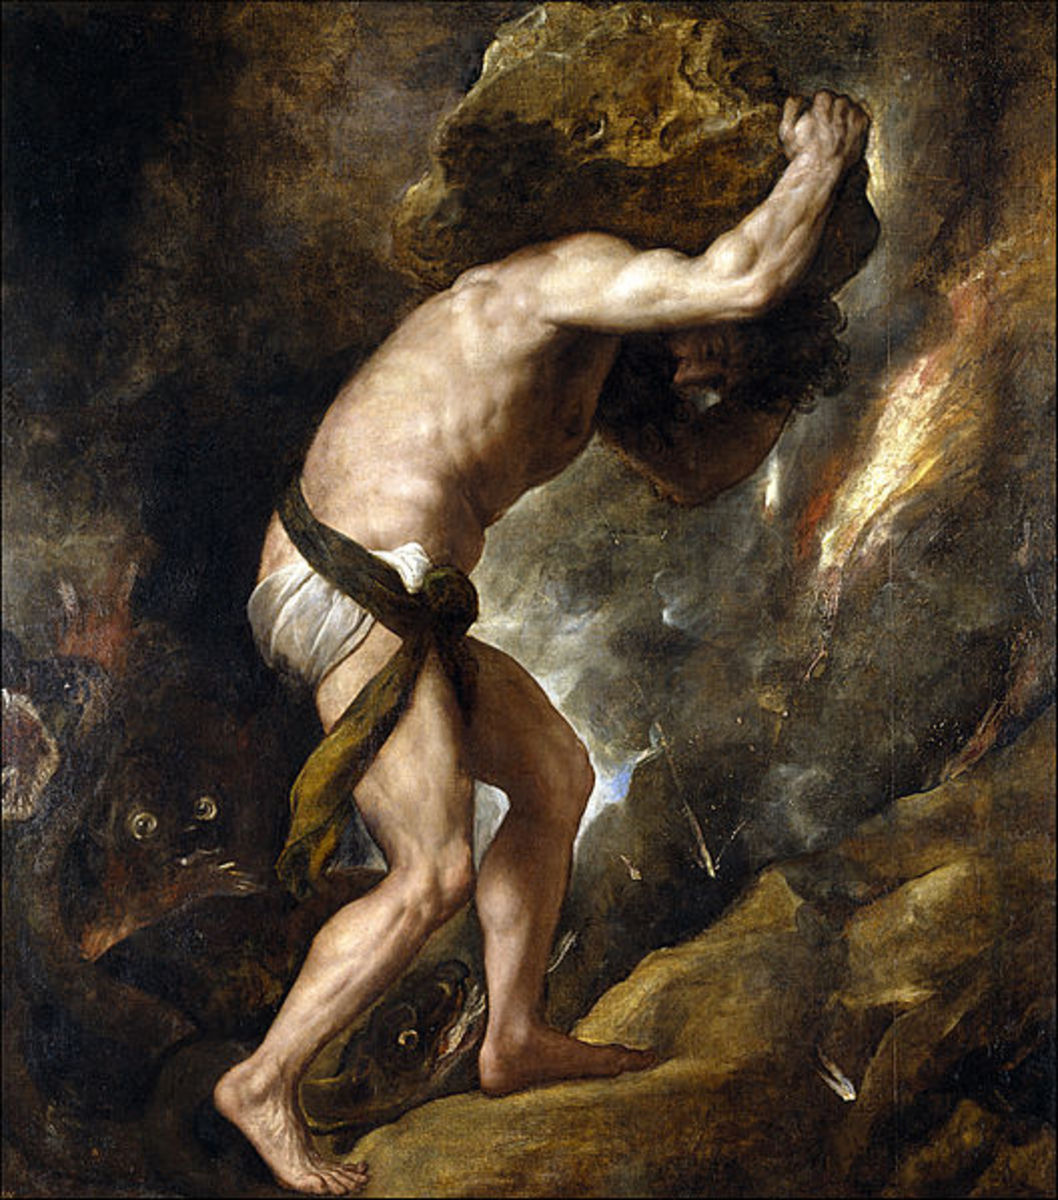 The Myth of Sisyphus from Ancient Greece